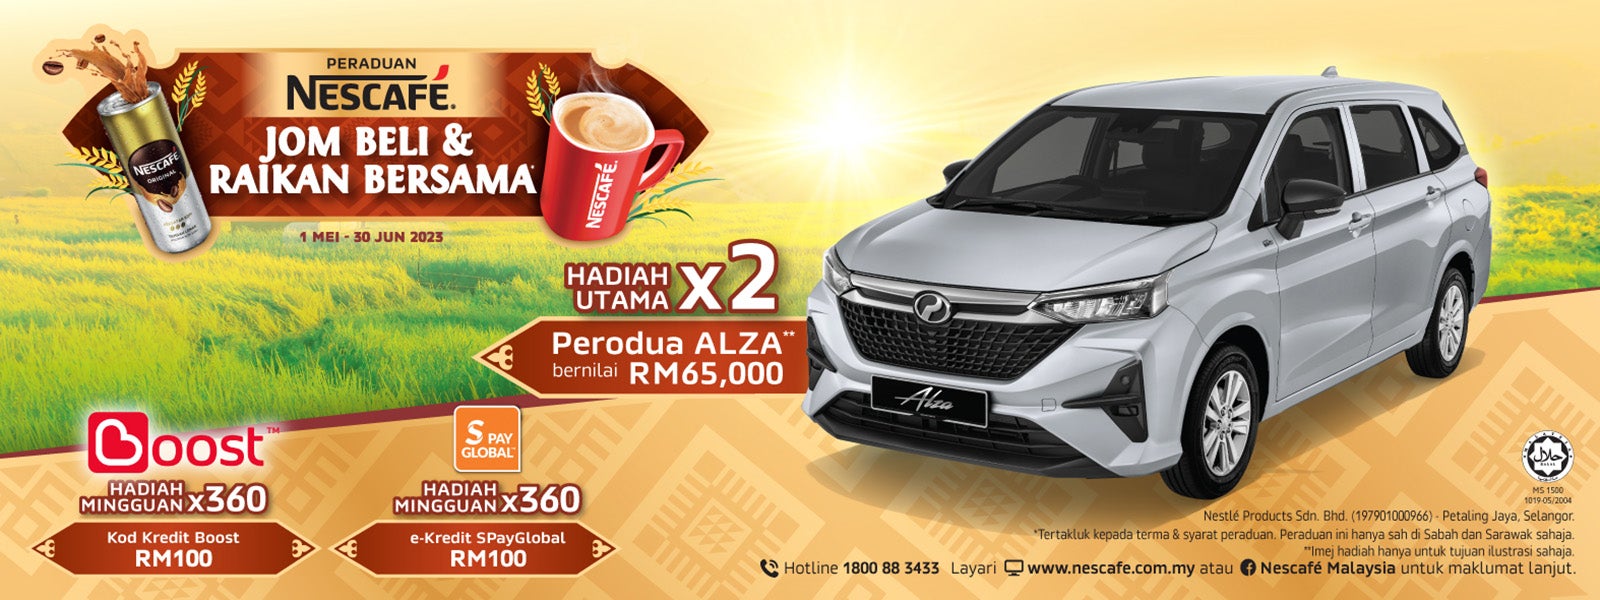 Nescafe-keamatan-Banner-with-more-than-1